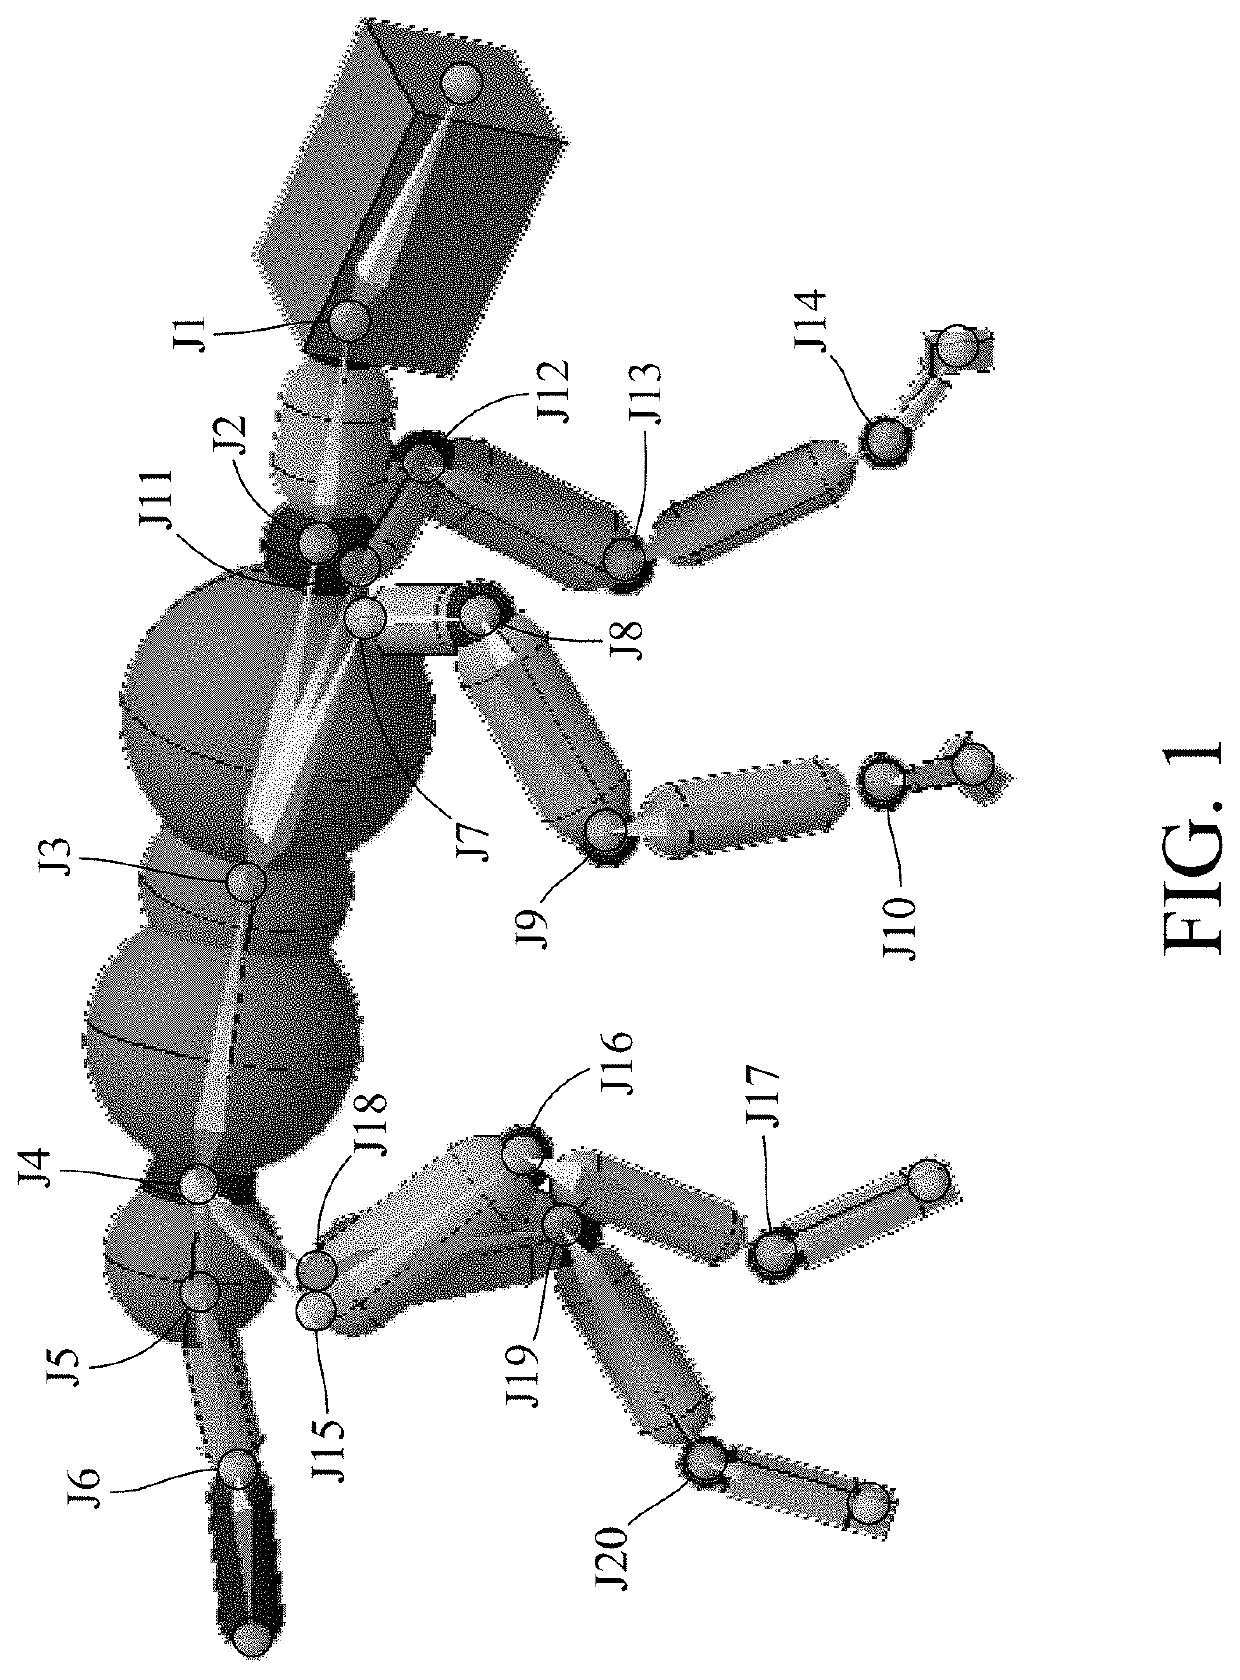 Method for training virtual animal to move based on control parameter